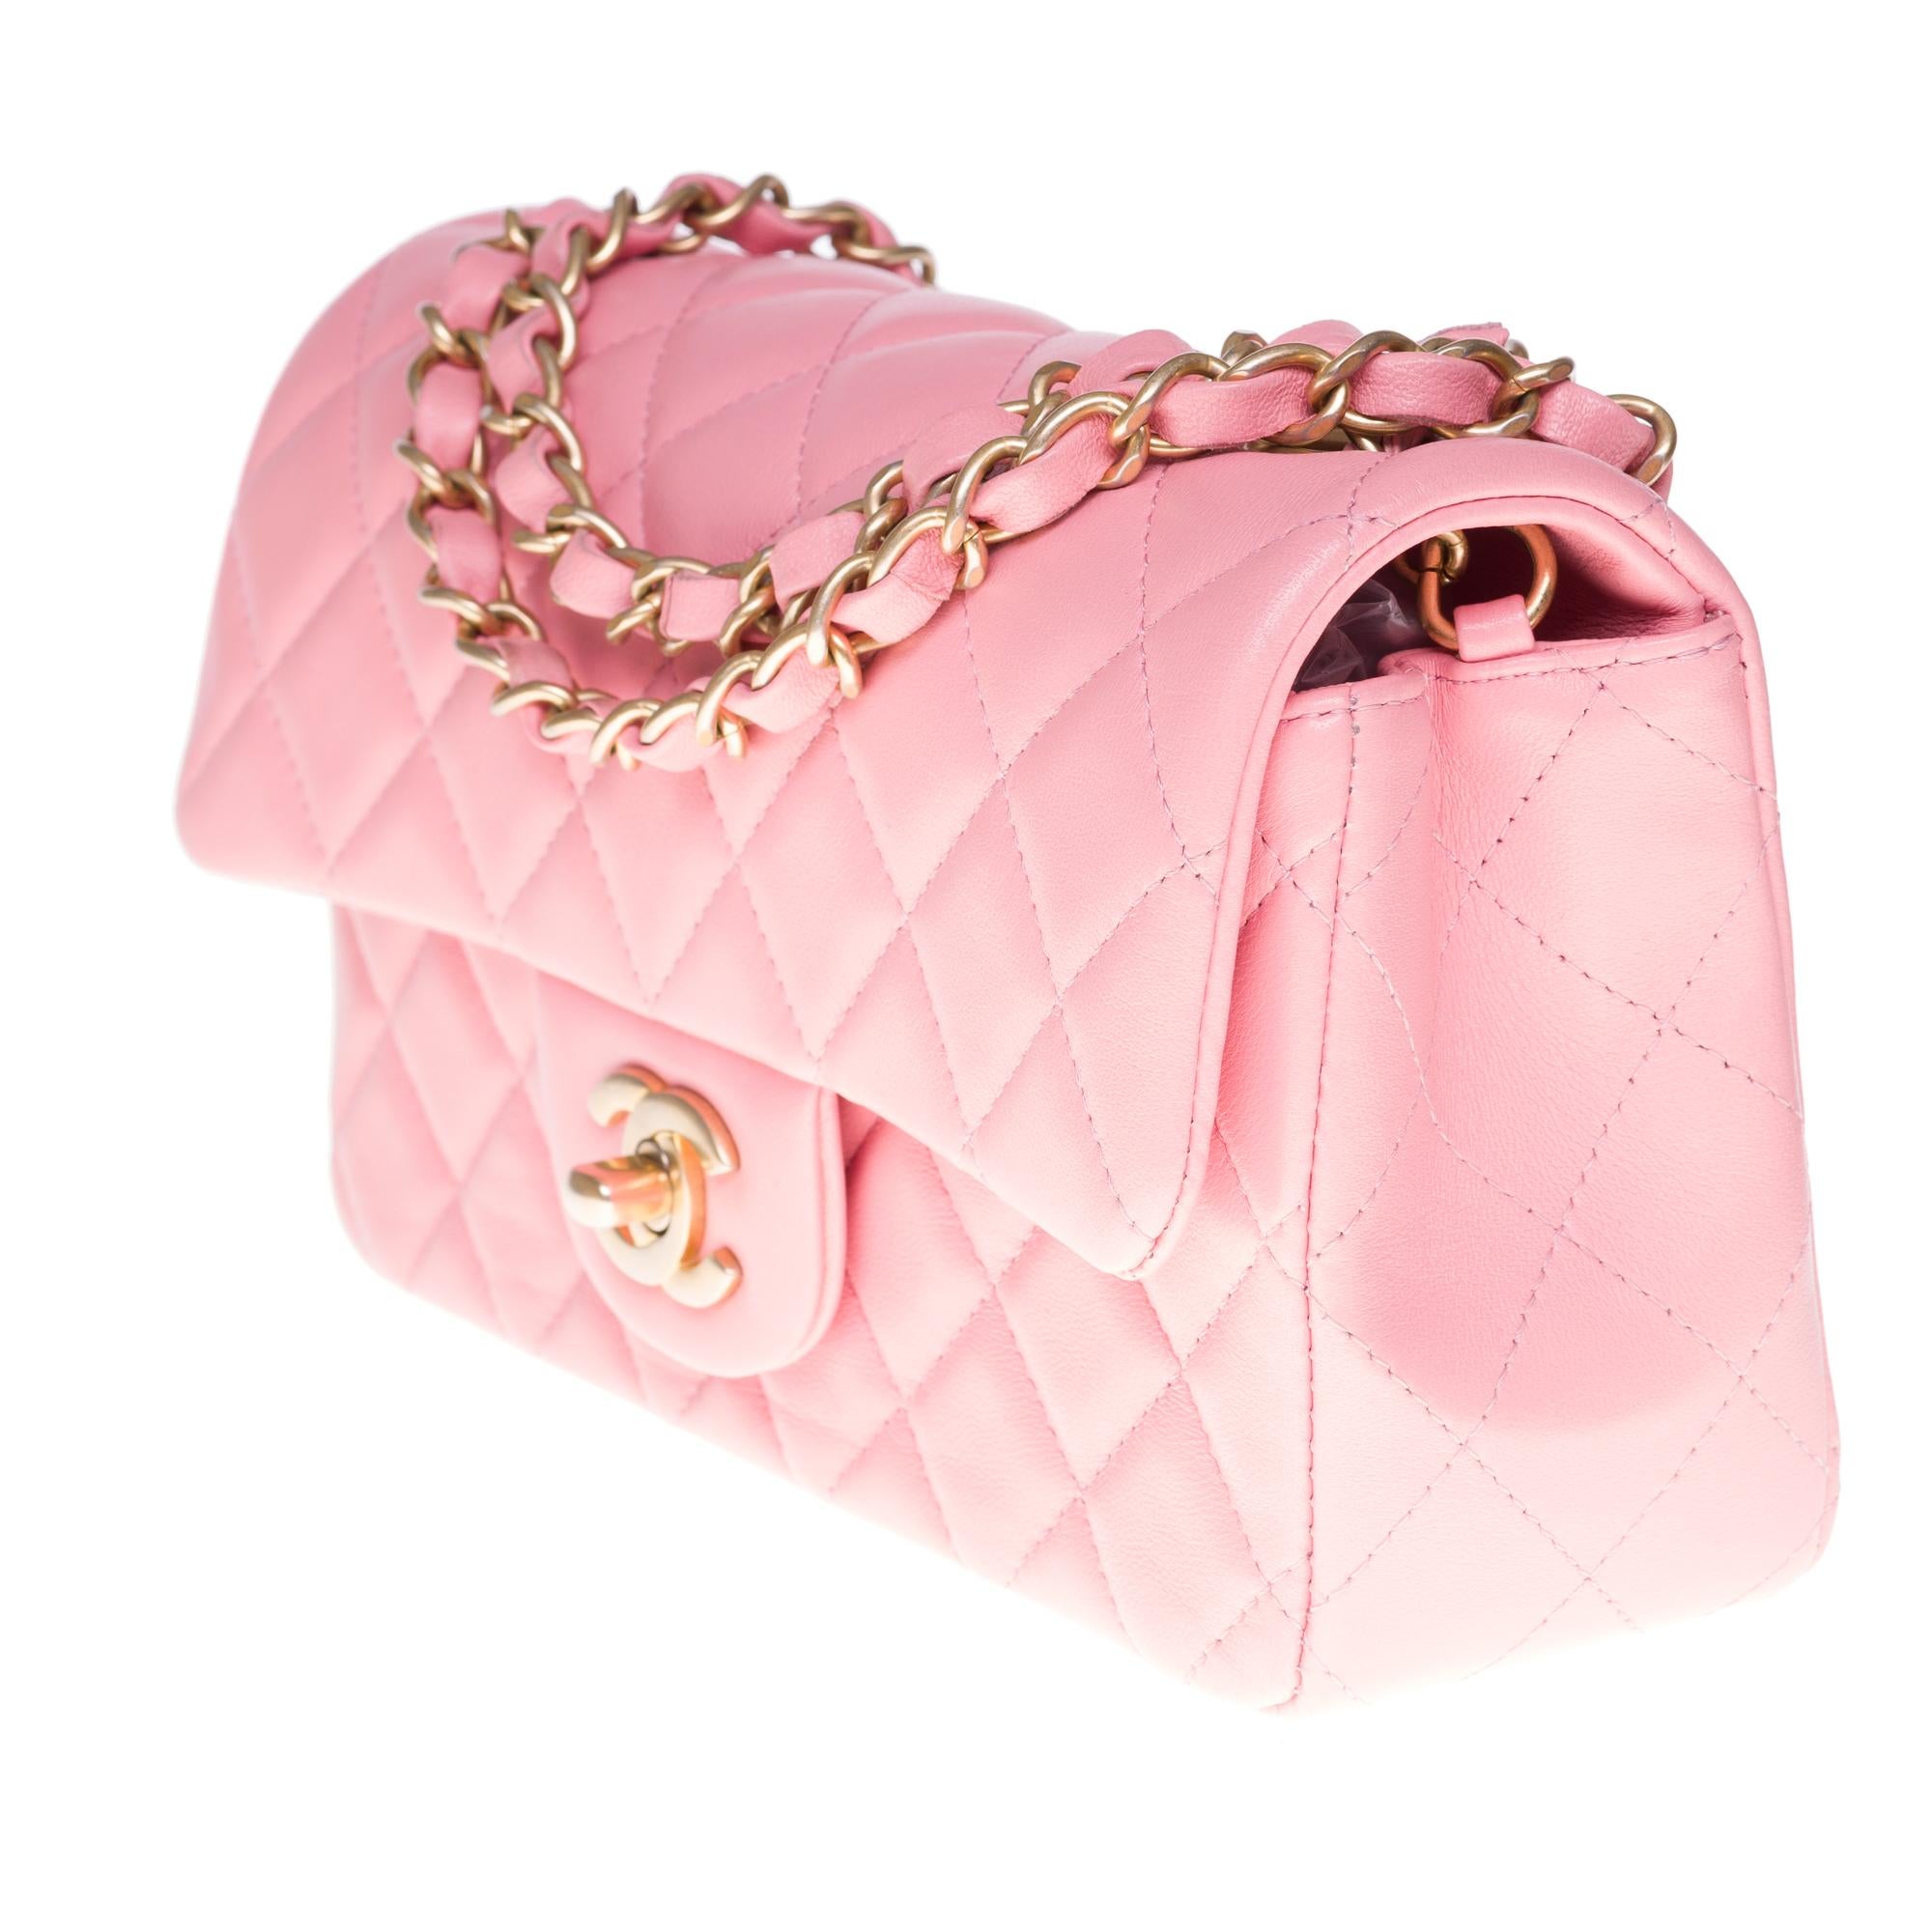 pink chanel bag with gold hardware